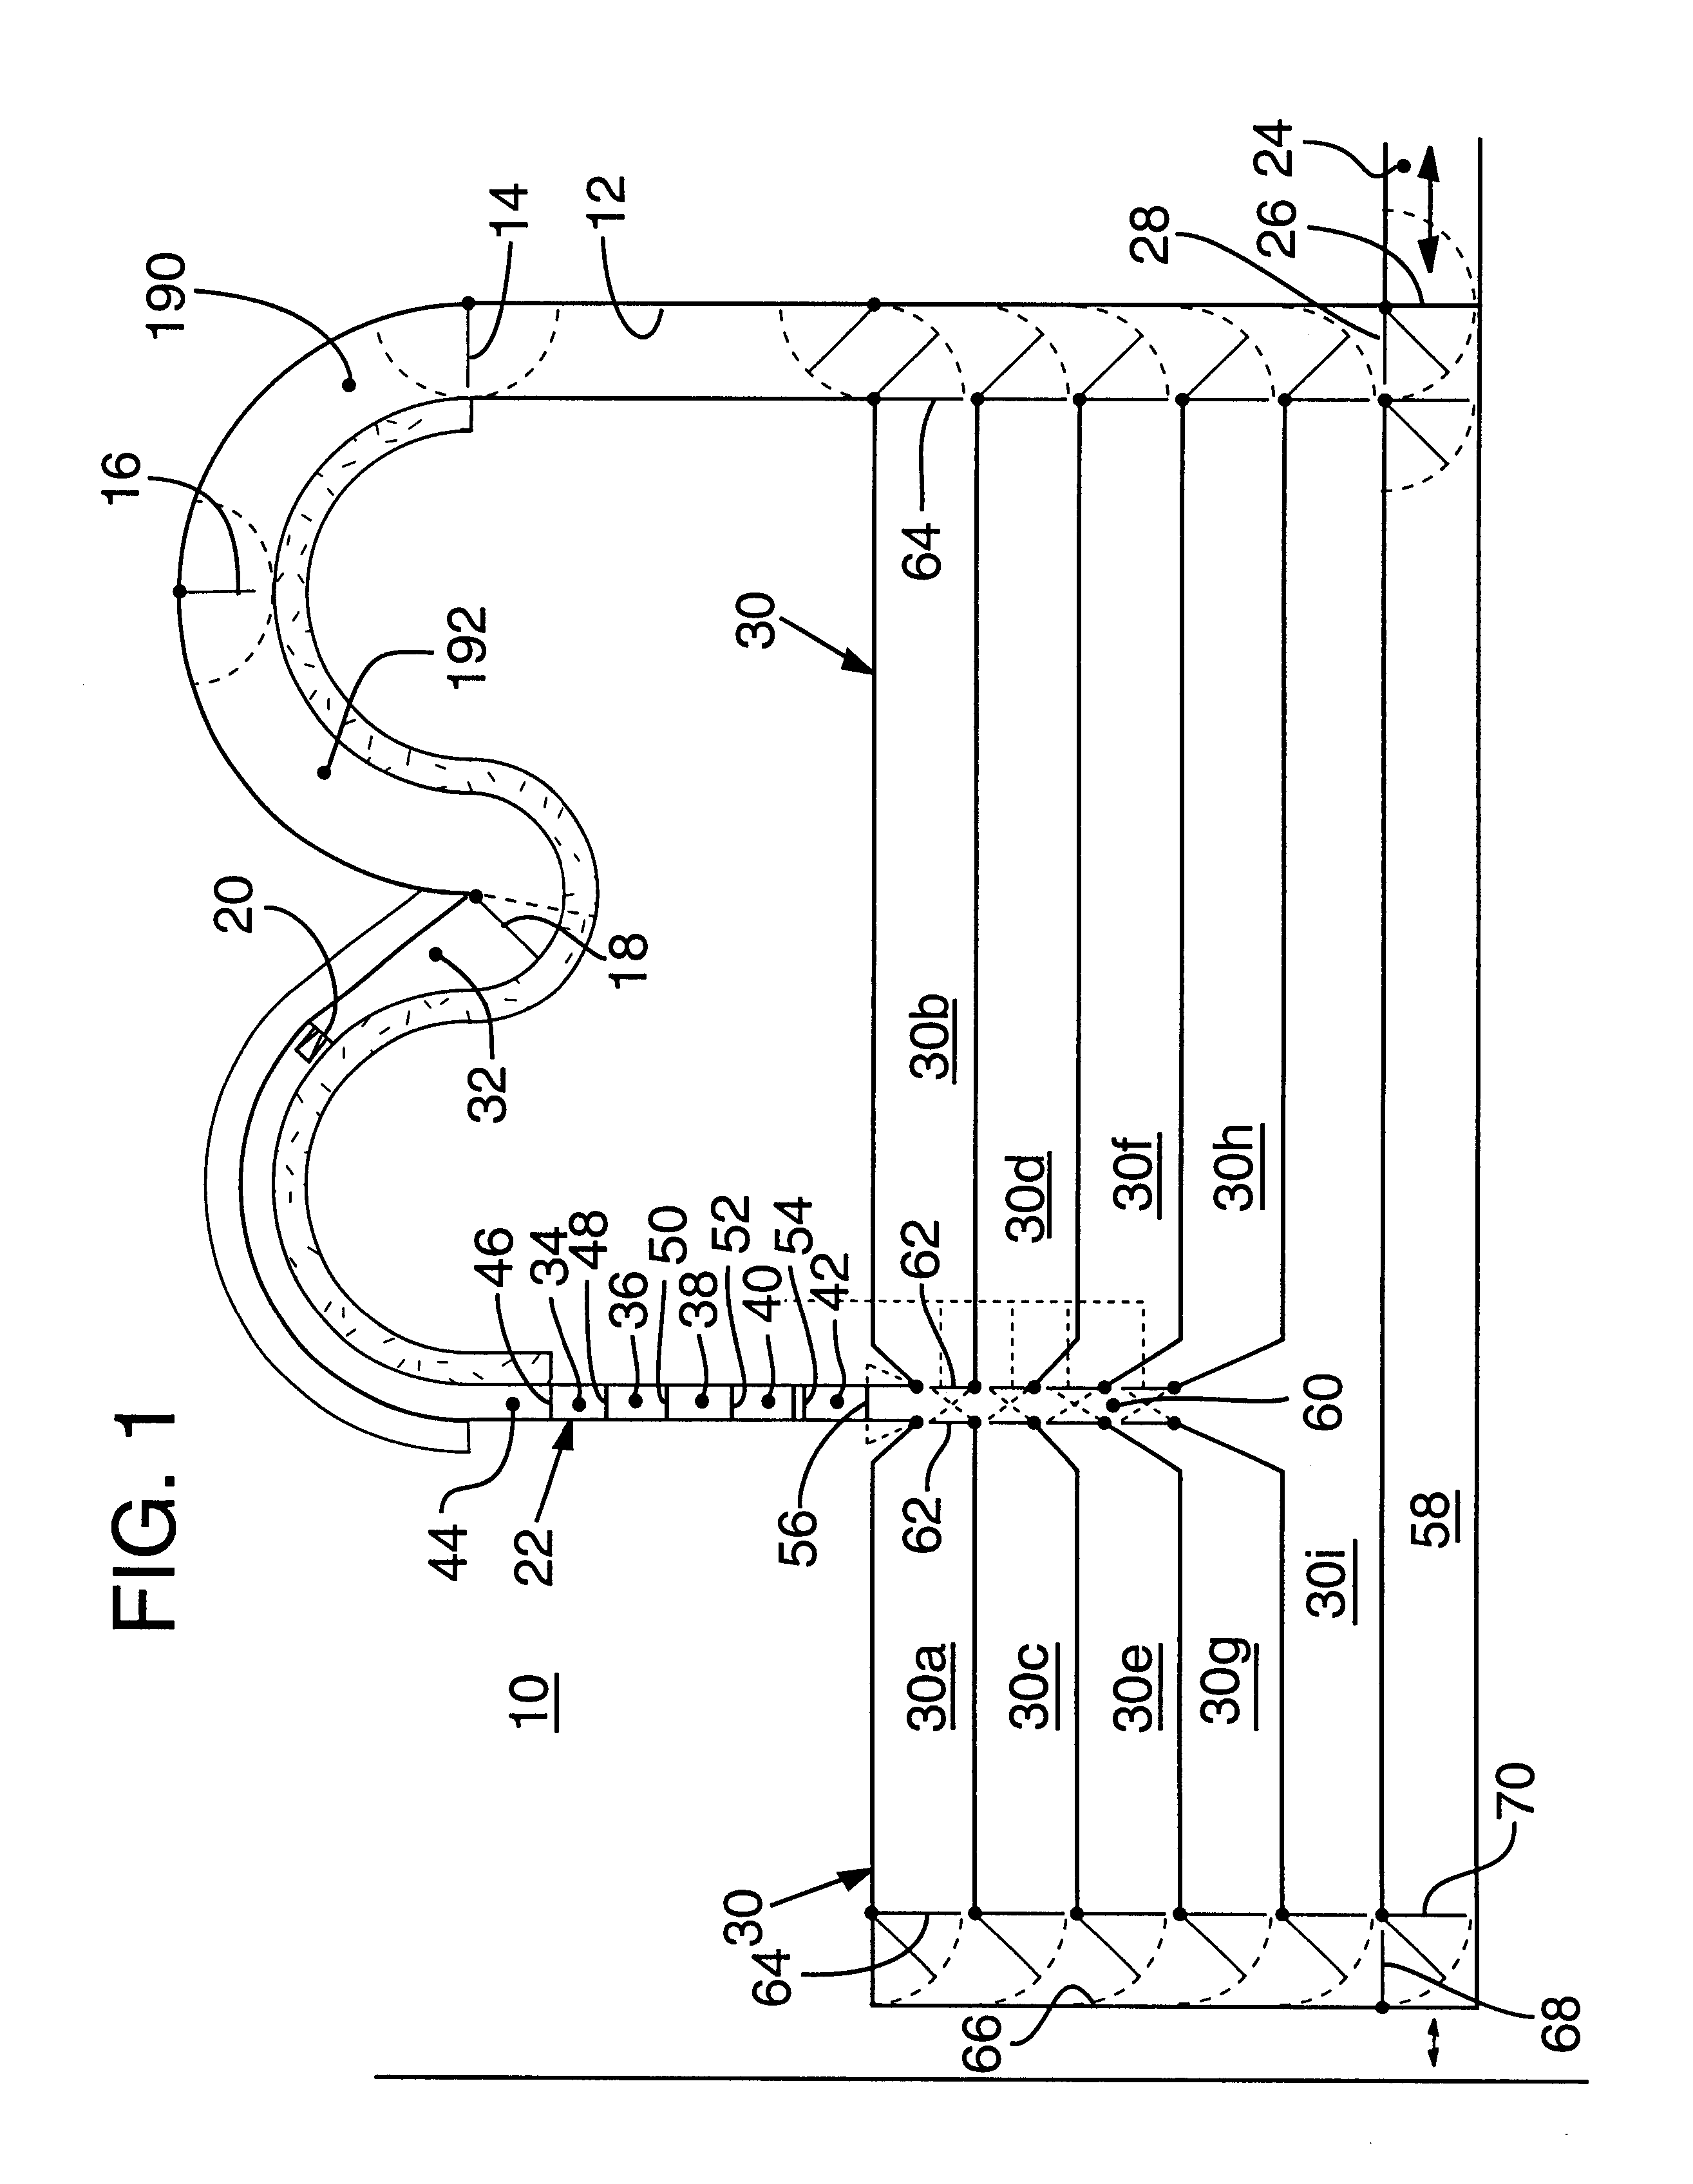 Cattle management method and system